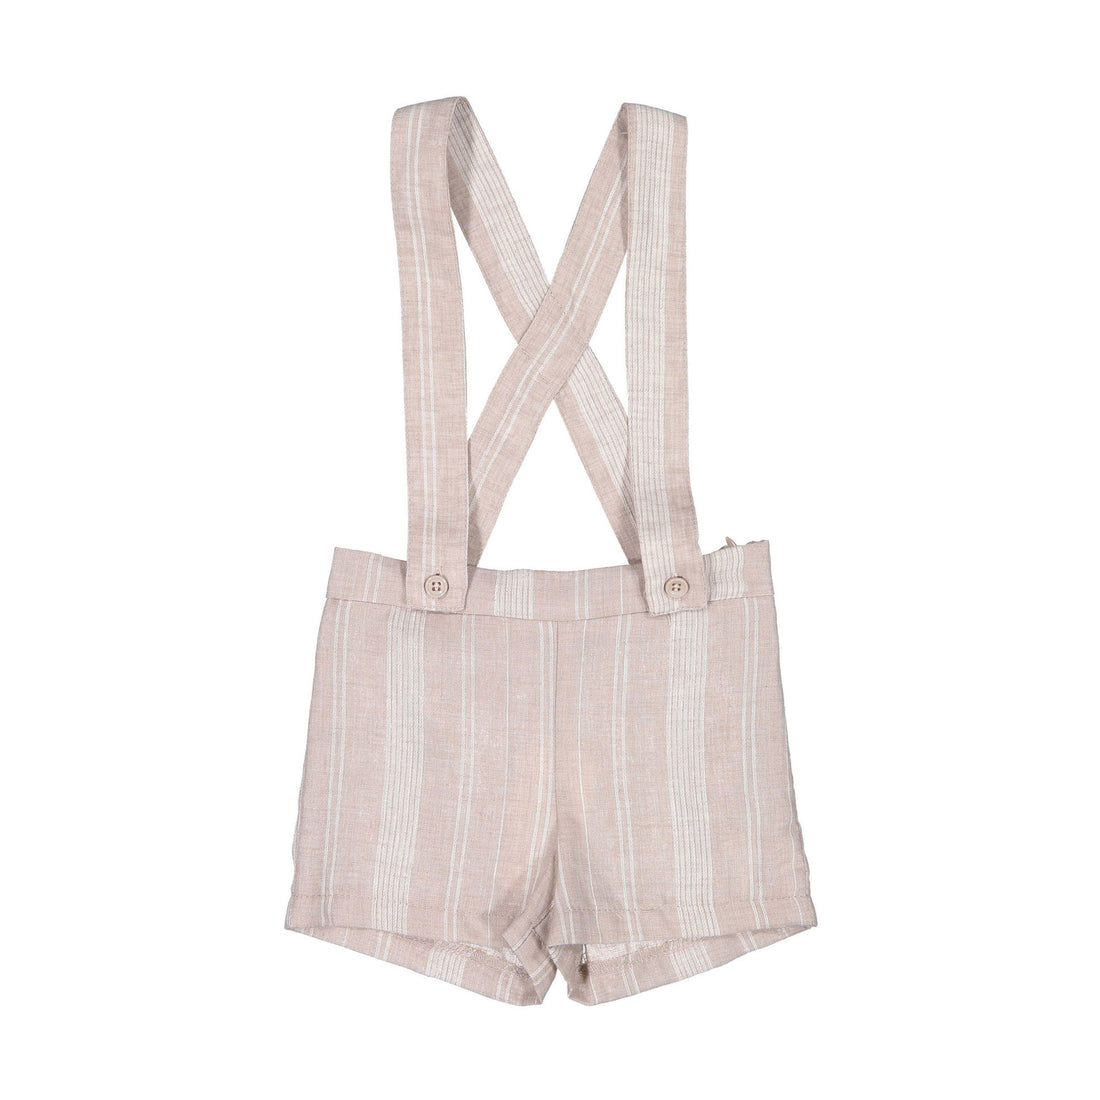 Boys and Arrows Beige Striped Suspender Shorts